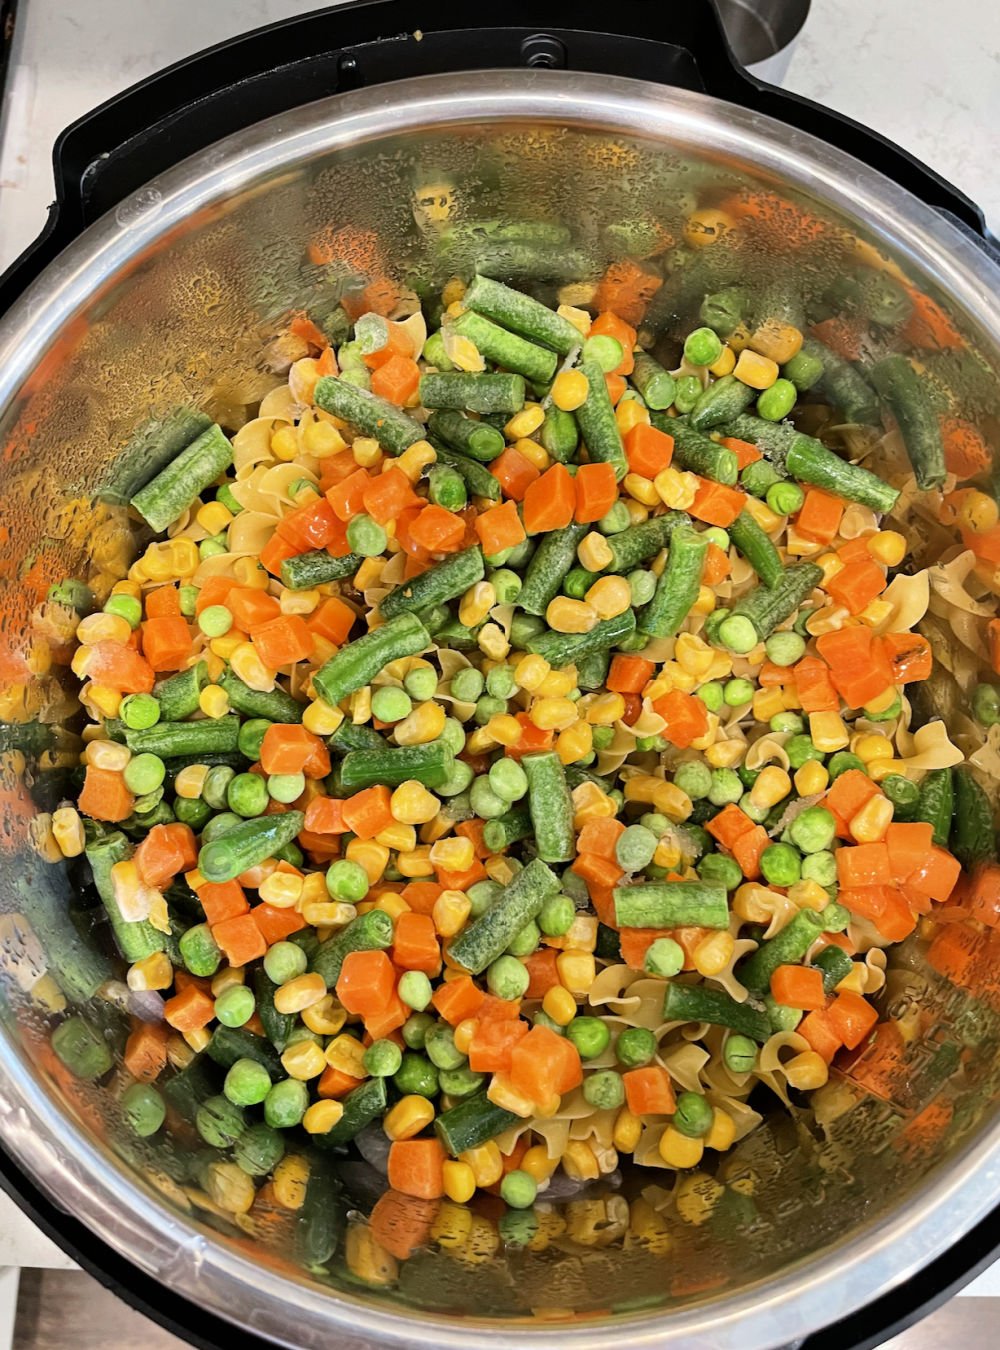 frozen vegetables and noodles ready to cook in Instant pot